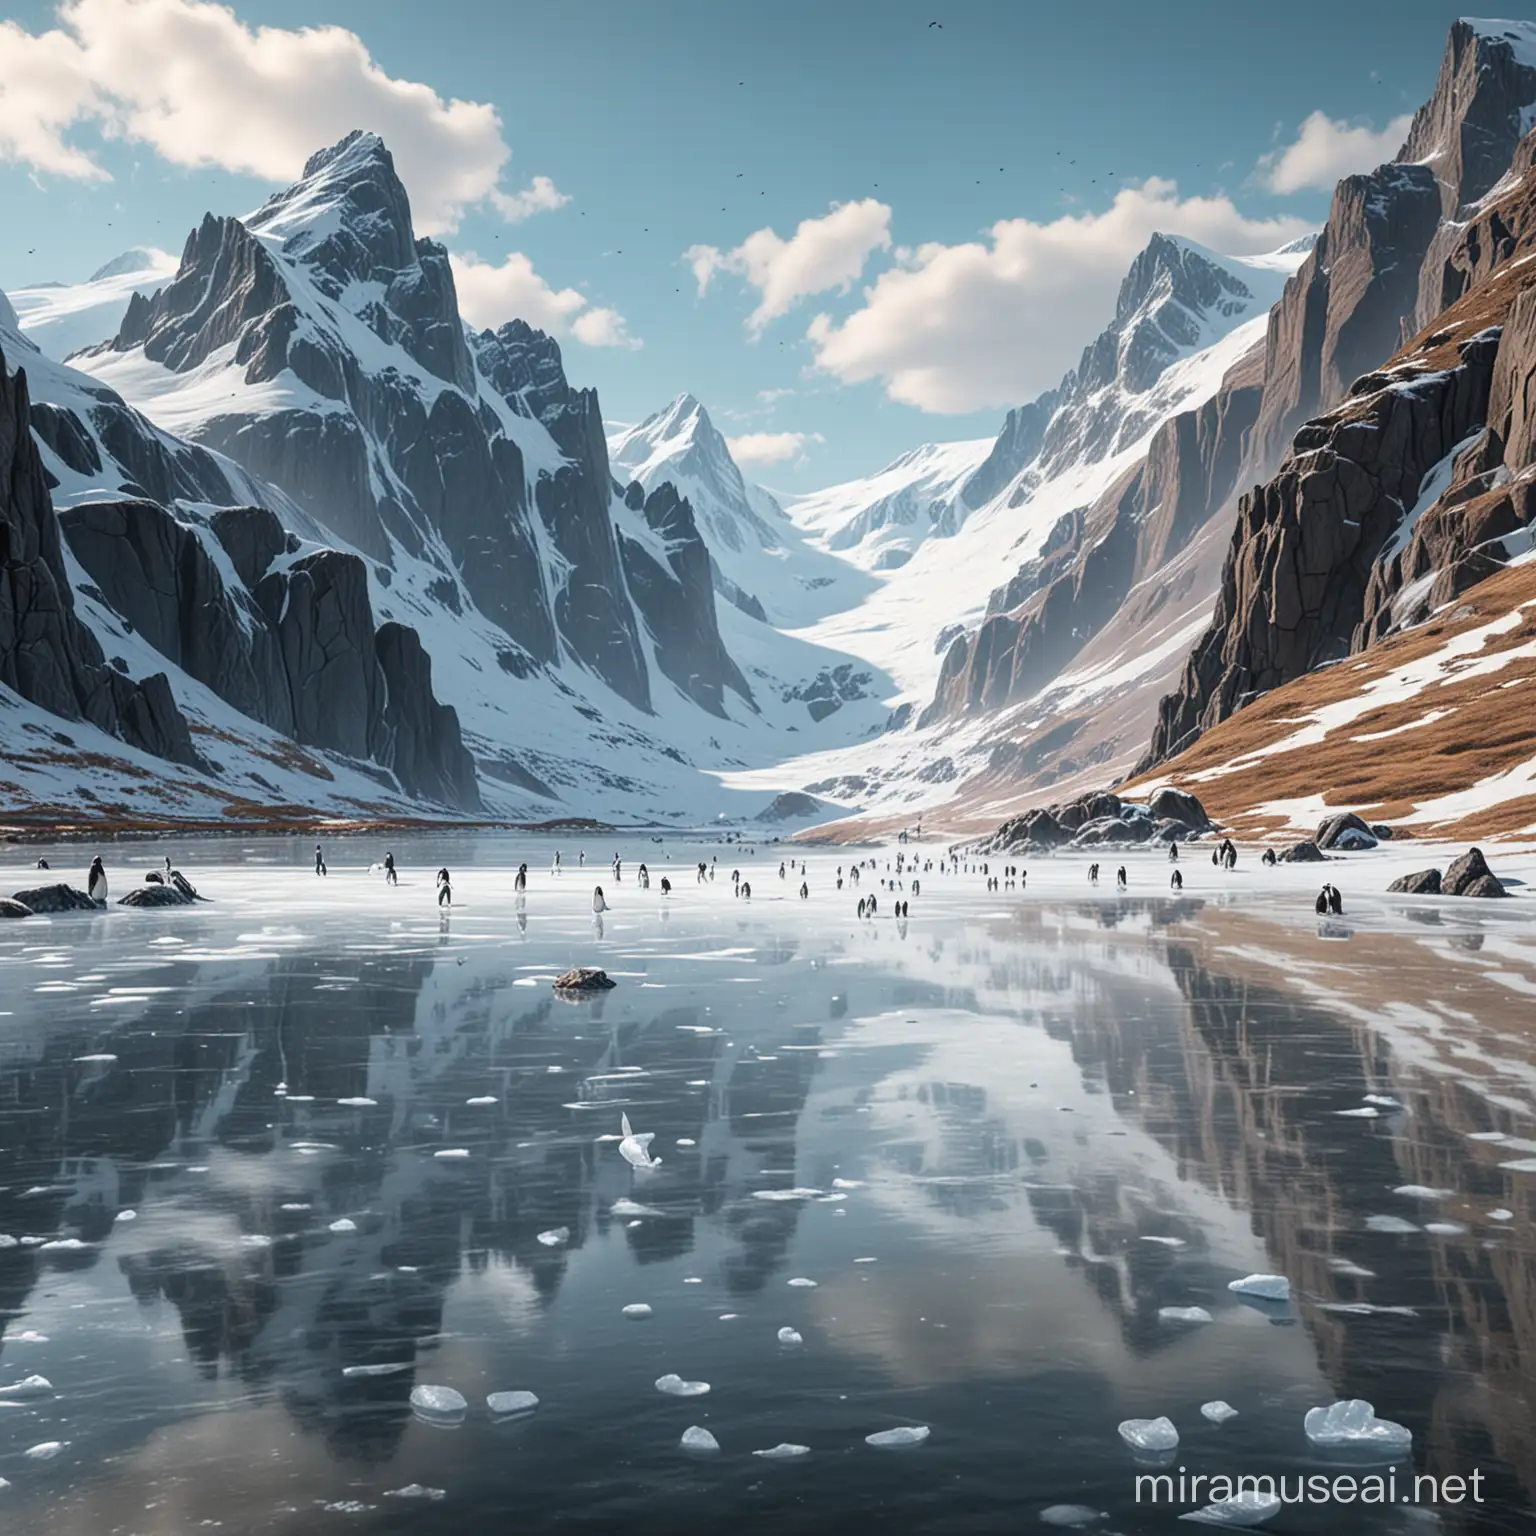 A beautiful, hyper realistic landscape with mountains in the background. A frozen lake is in the foreground, with penguins ice
skating